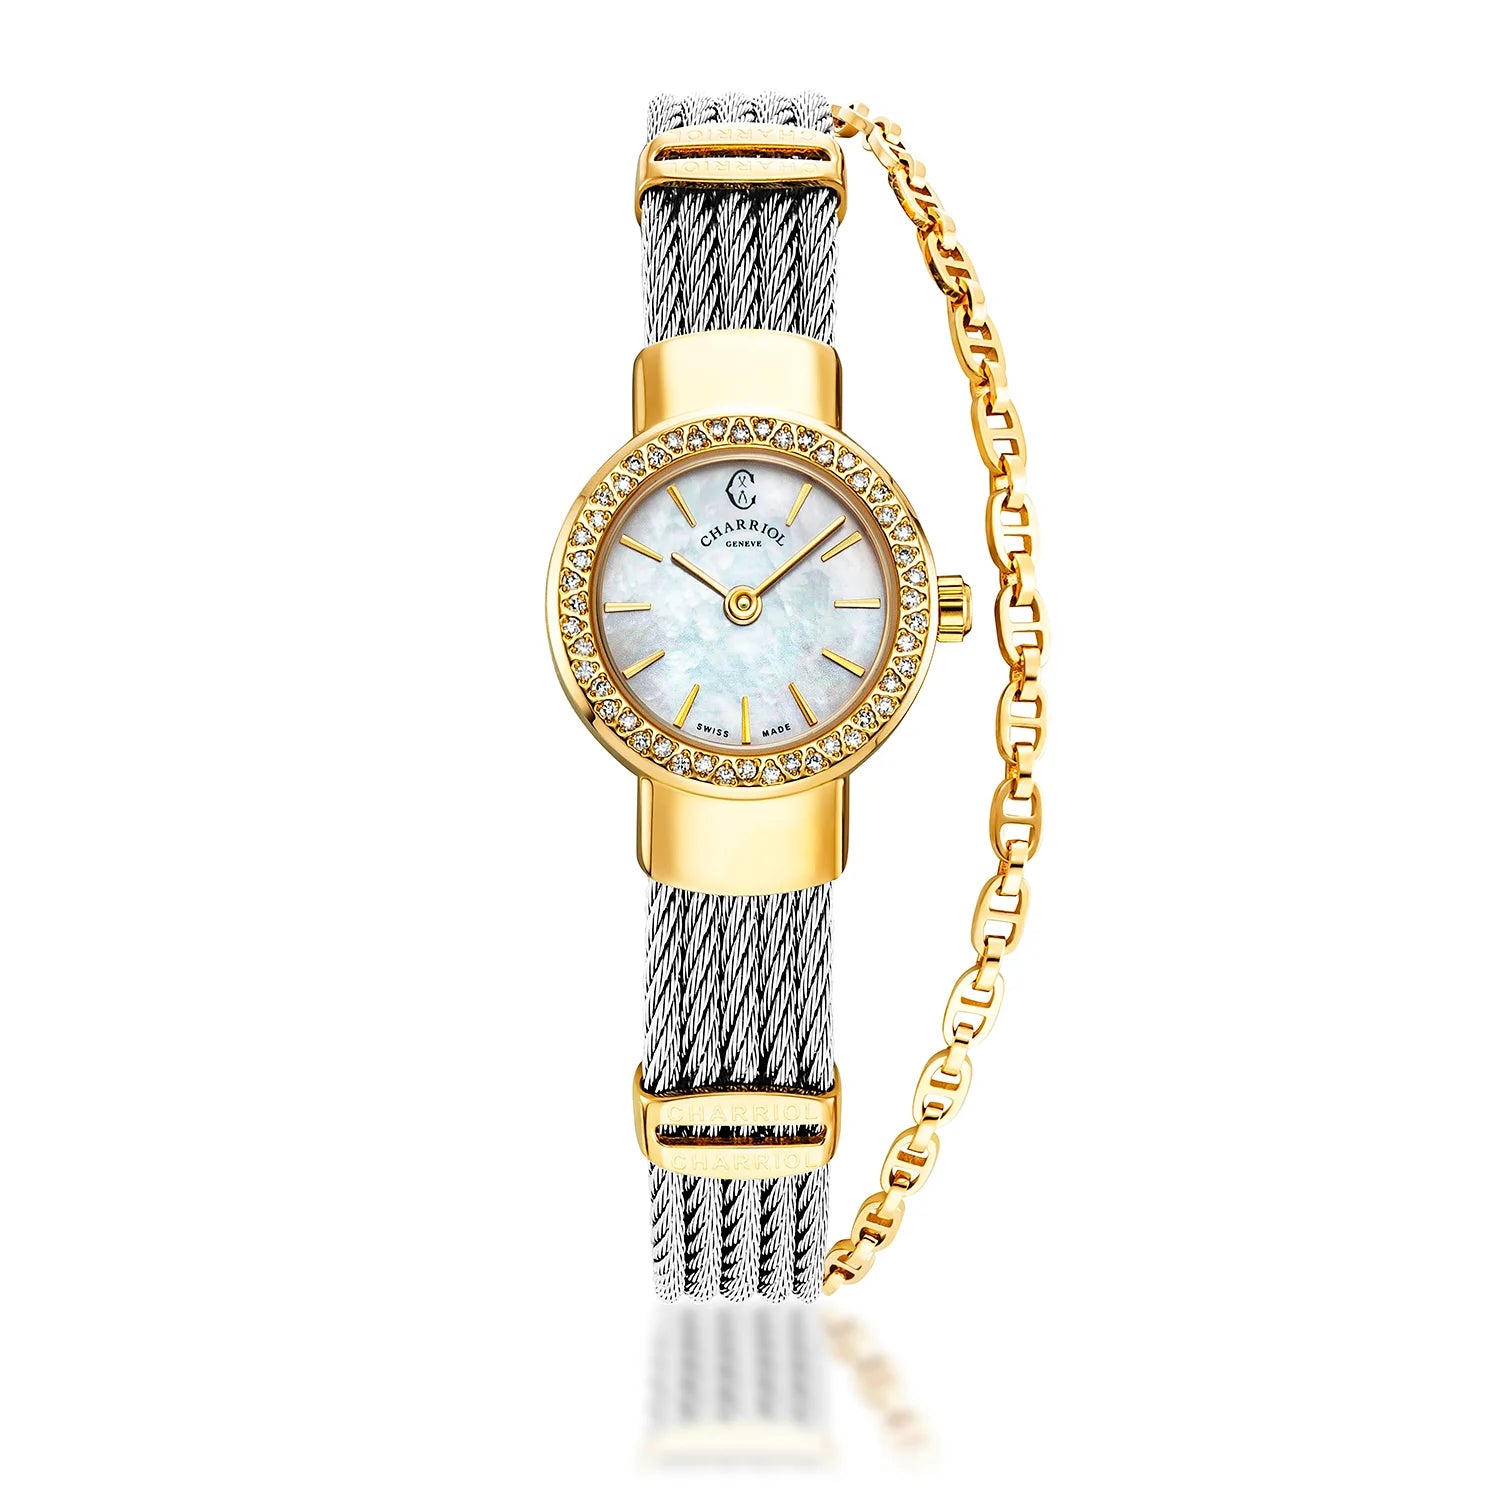 St Tropez Icon 20mm Watch Yellow Gold PVD, Steel Cable, 48 Diamonds Bezel and White MOP Dial - Charriol Geneve -  Watch